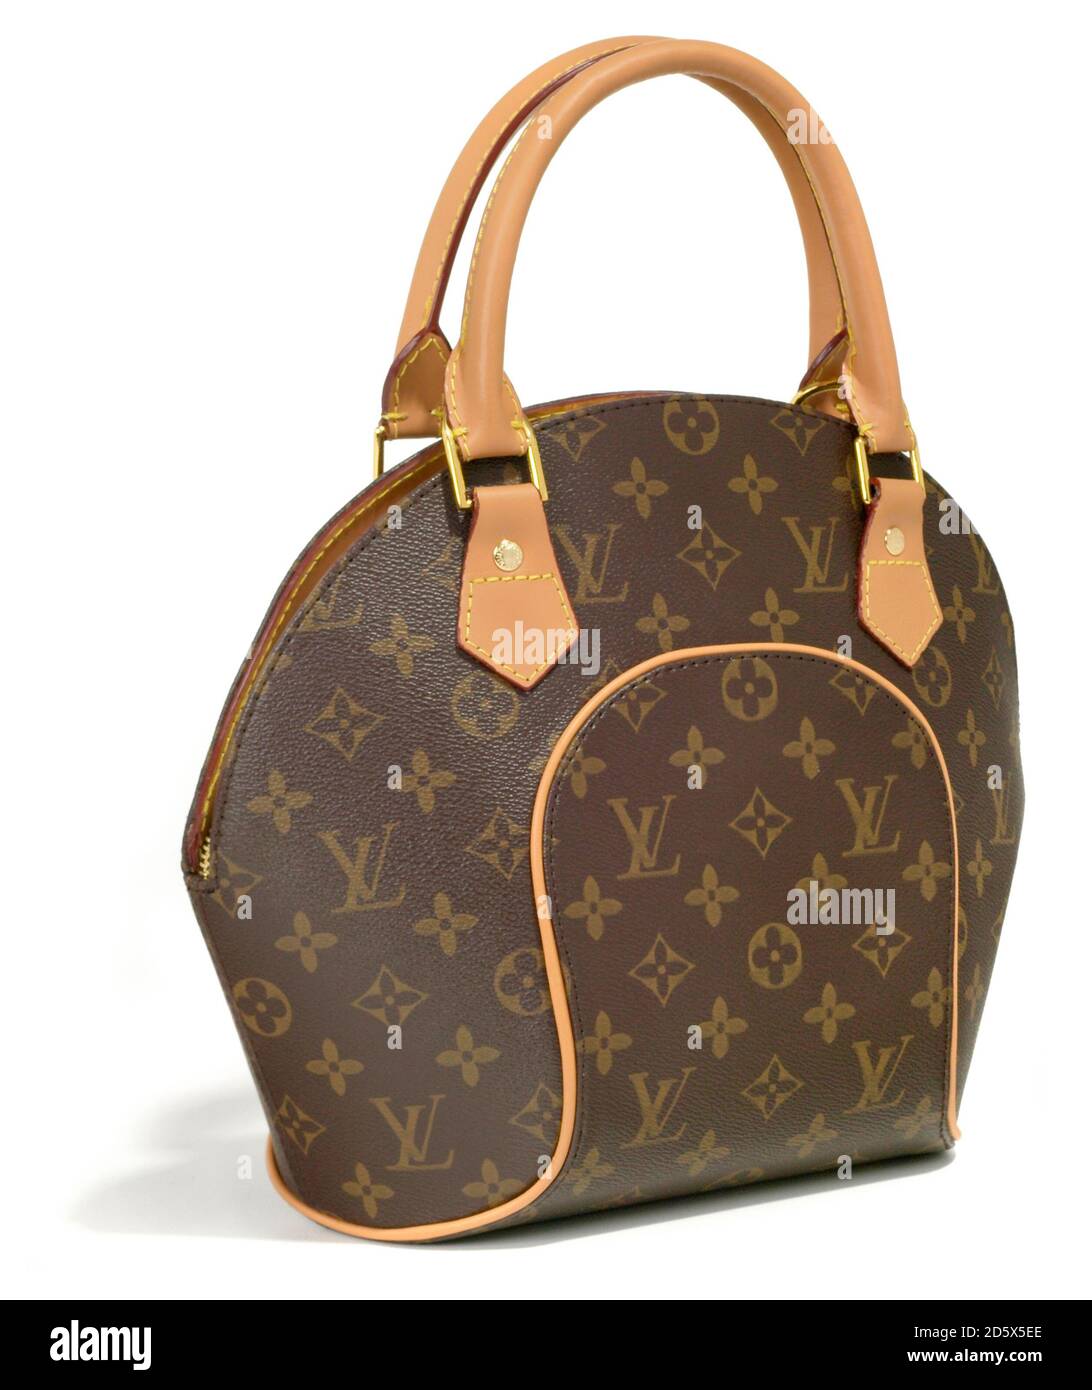 Louis Vuitton monogrammed bowling vanity canvas handbag with leather trim and handles photographed on a white background Stock Photo